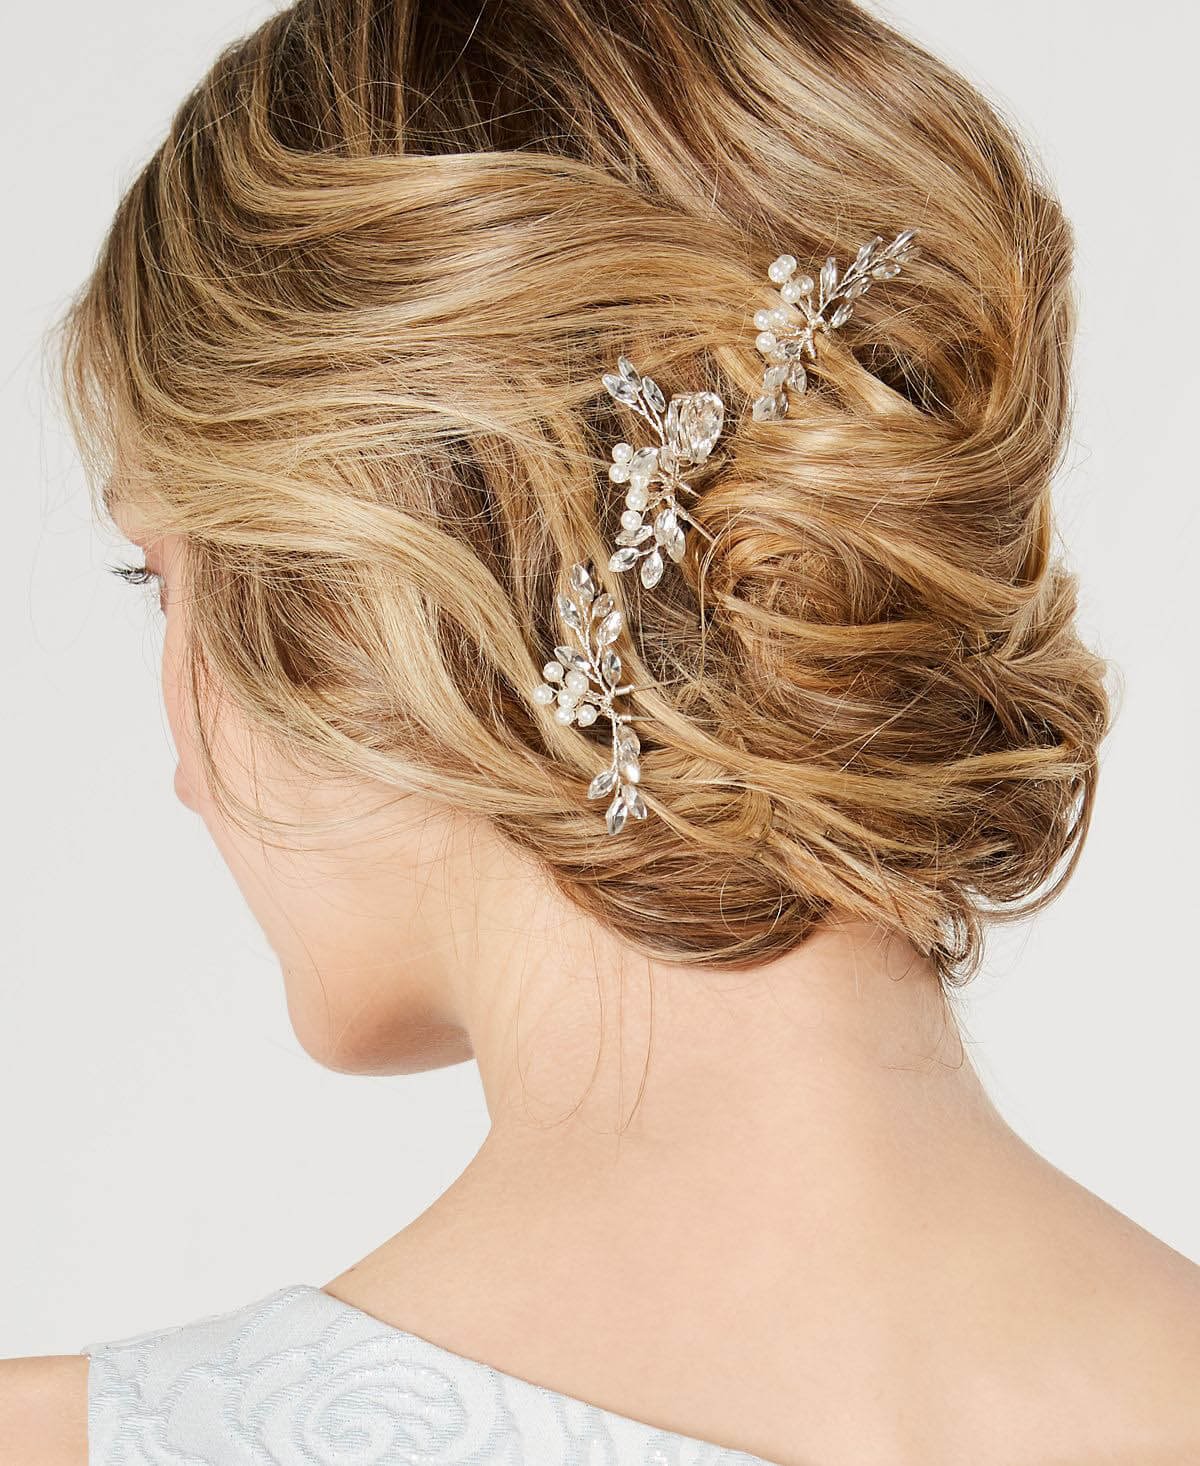 Hair comb as wedding accessories